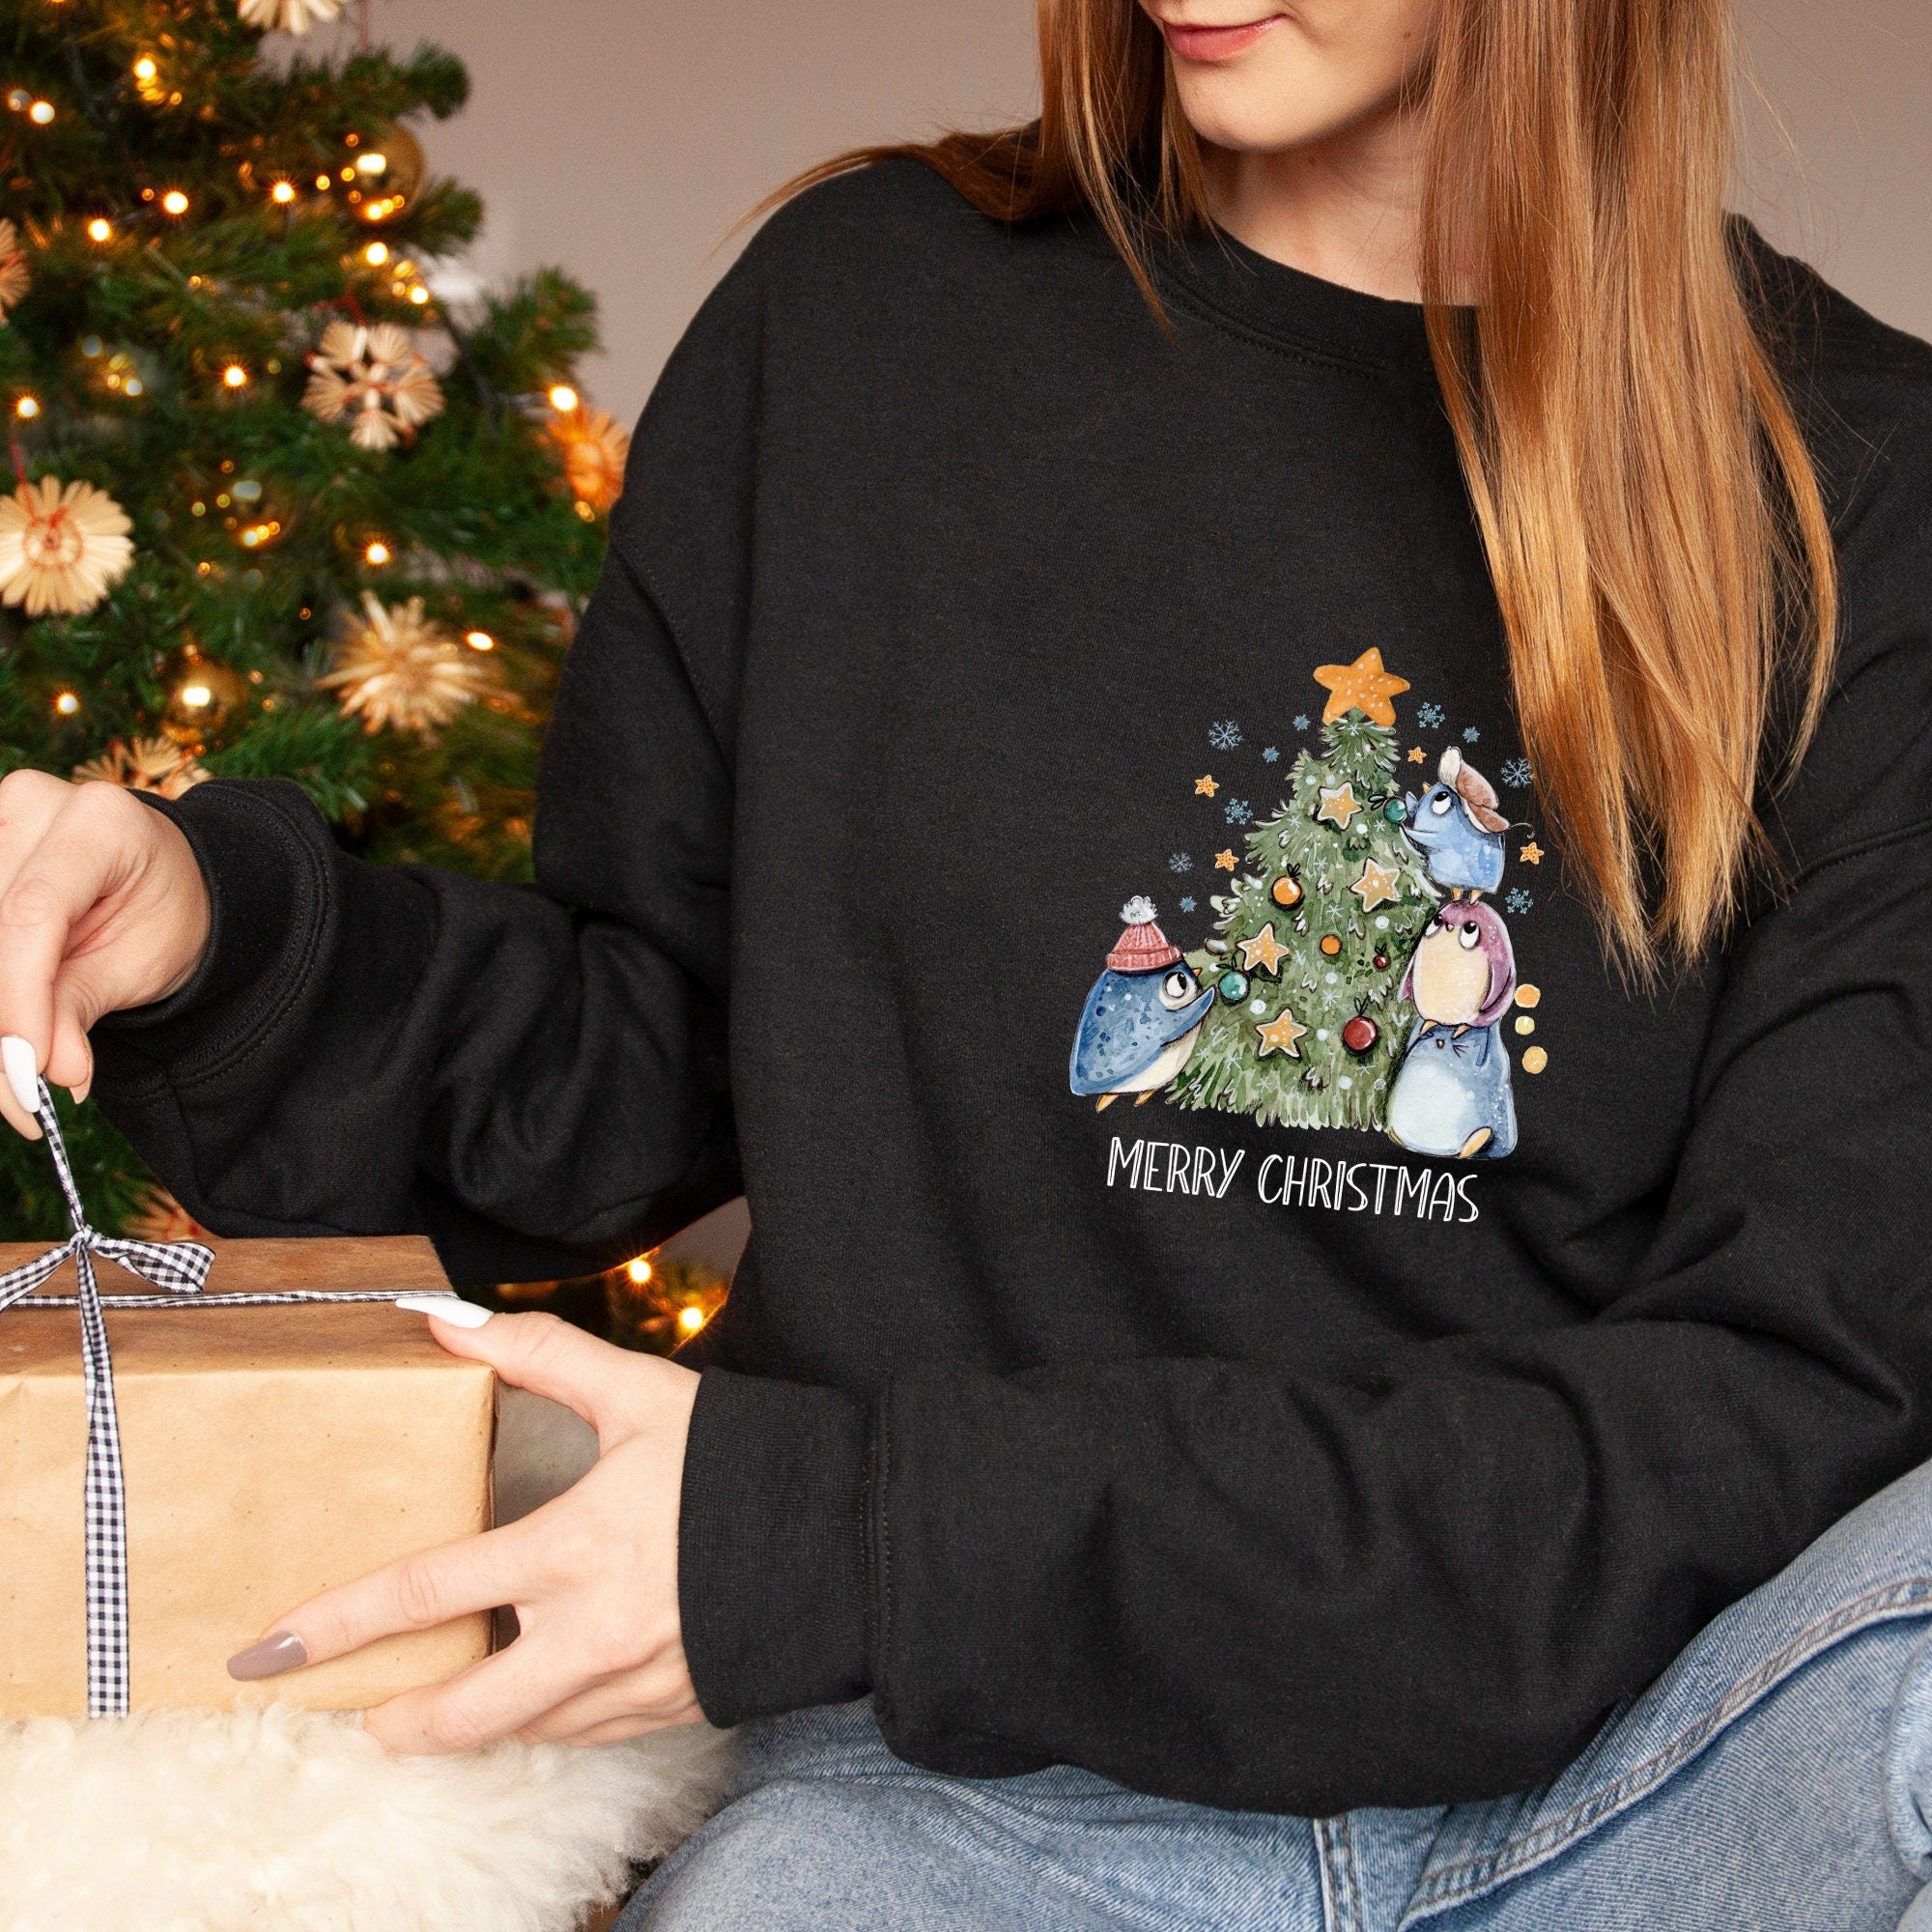 Christmas Jumper With Cute Penguins And Tree, Xmas Sweatshirt, Cosy Christmas Jumper For Women